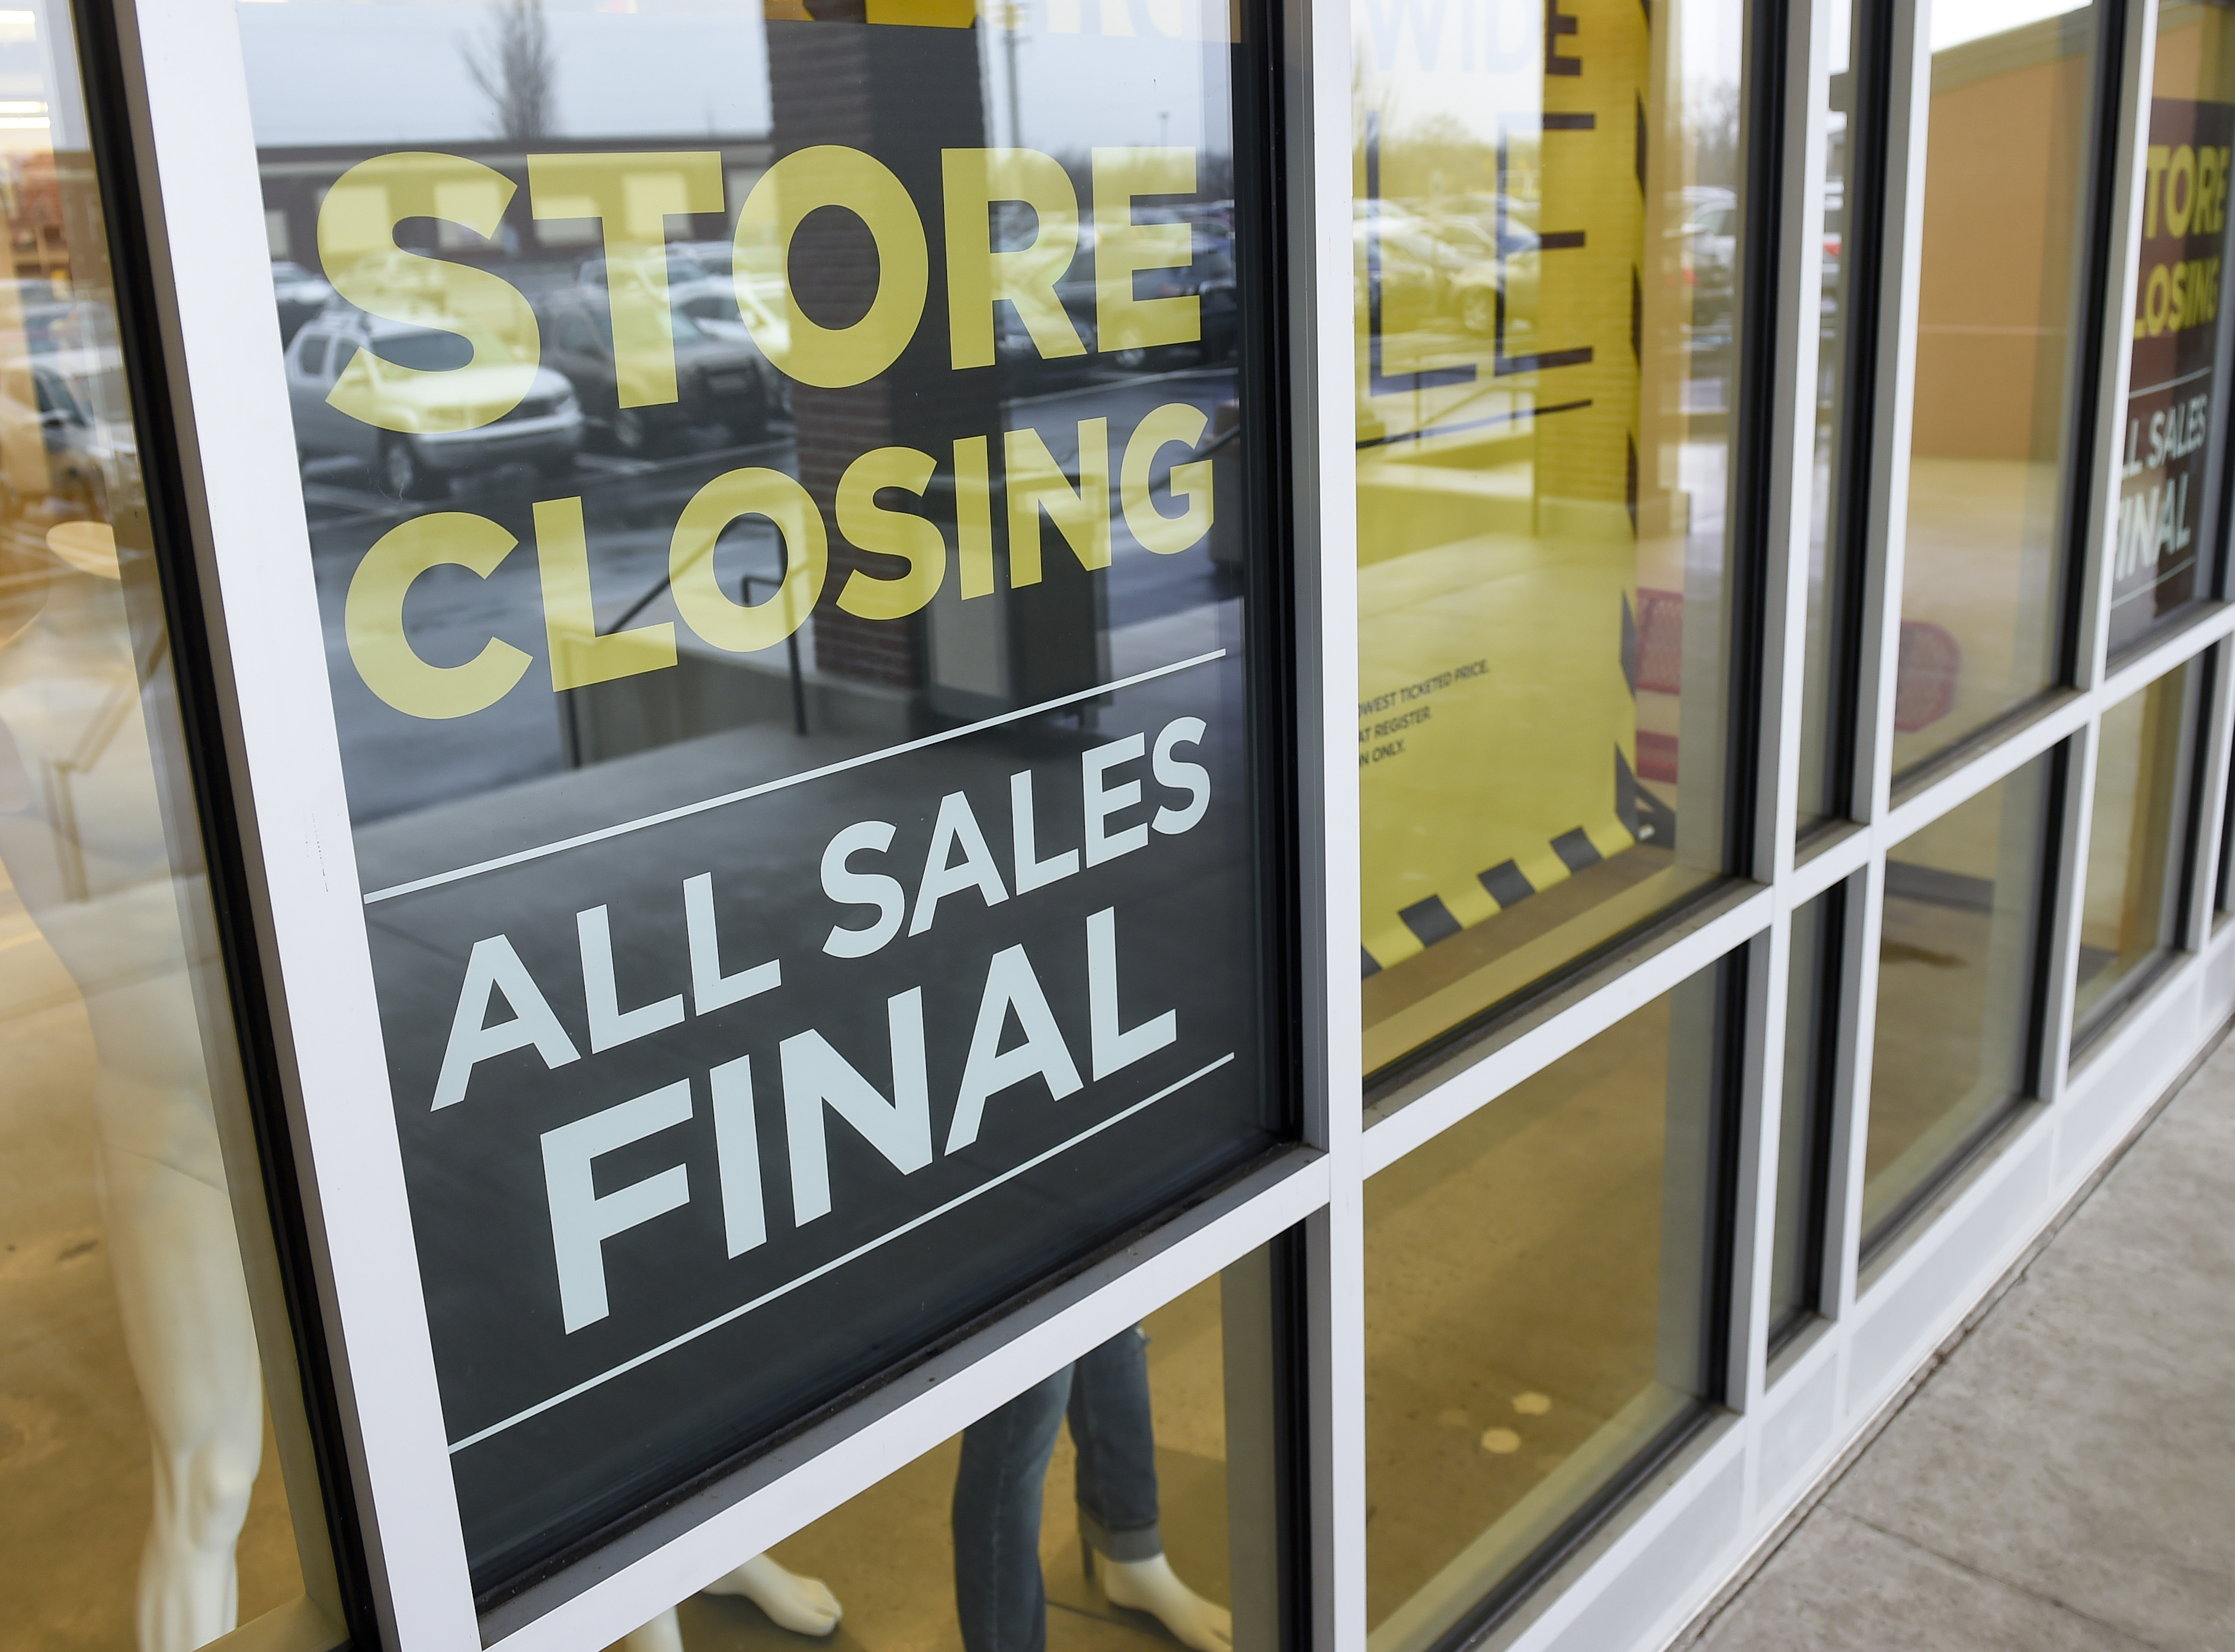 A store at the Knitting Mills in West Reading, Penn., closed permanently. (Photo by Ben Hasty/MediaNews Group/Reading Eagle via Getty Images)